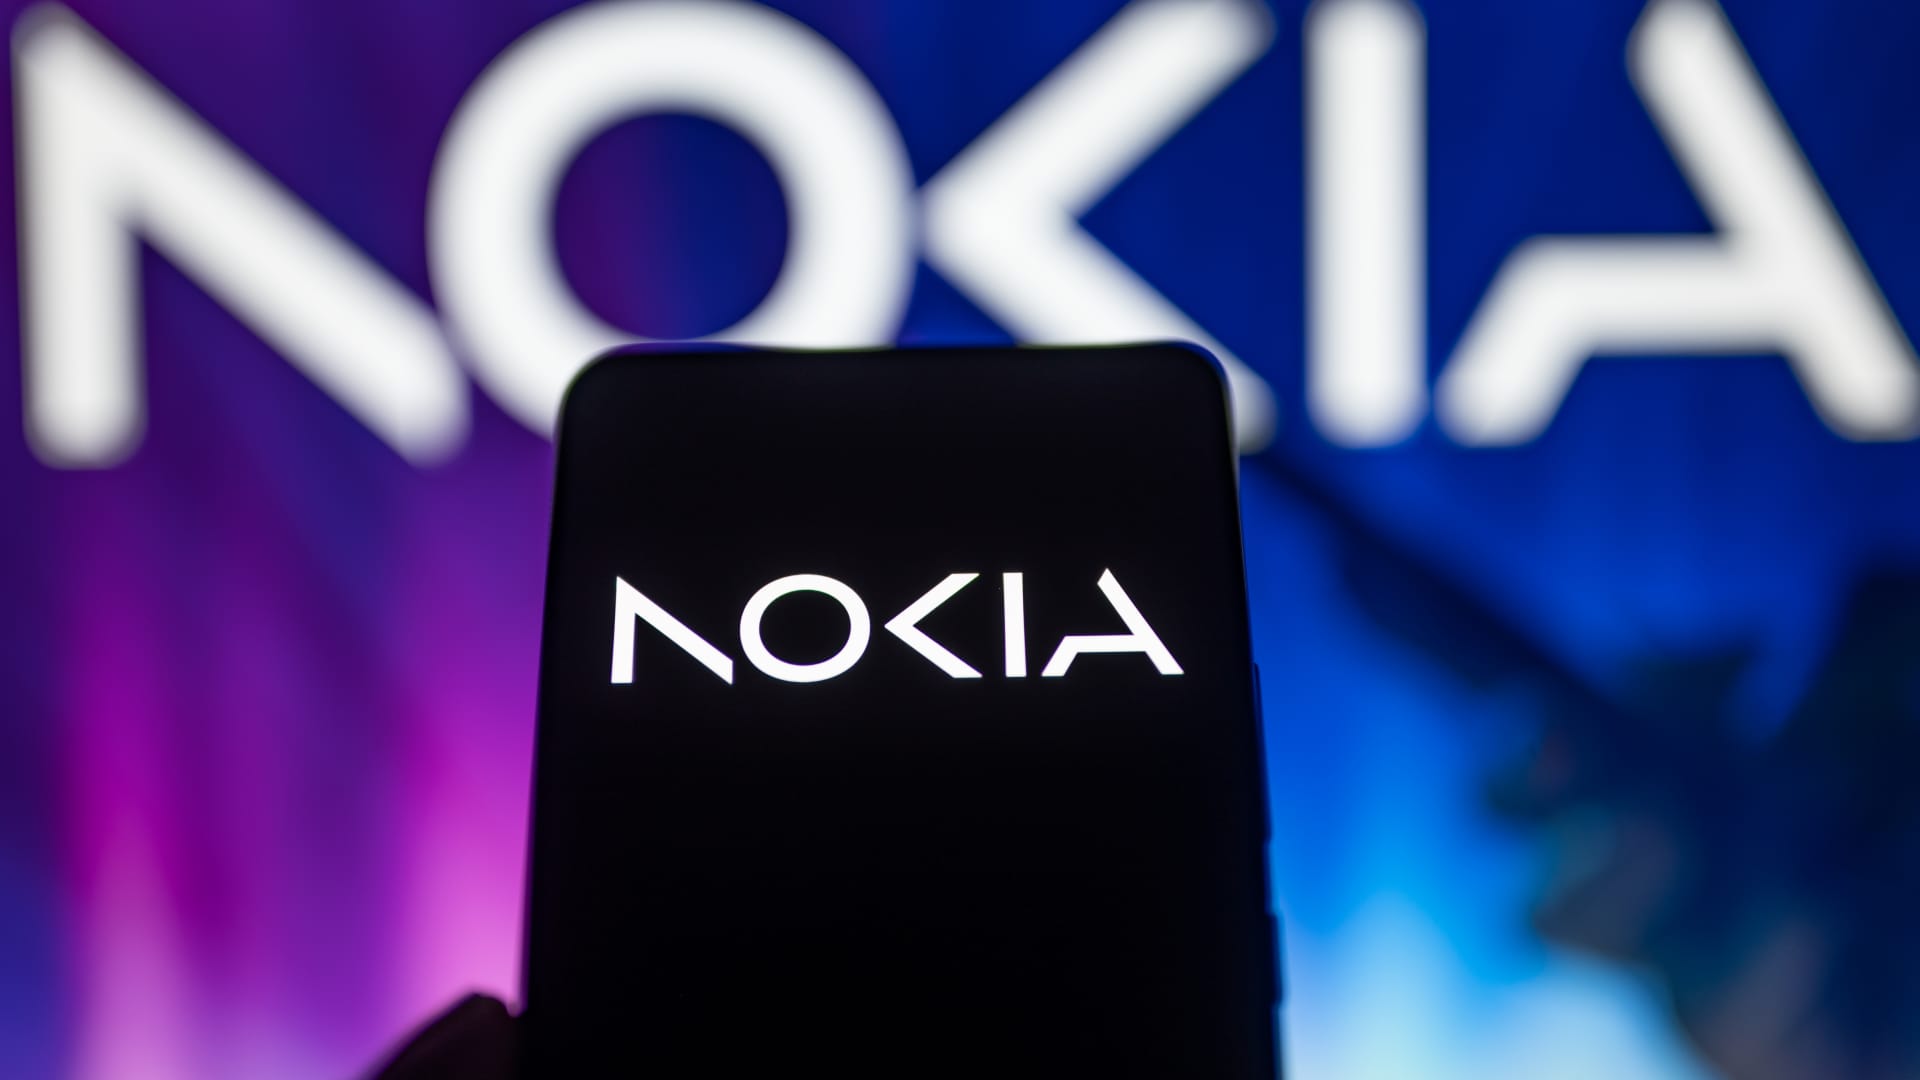 Nokia to cut up to 14,000 jobs after 69% profit plunge